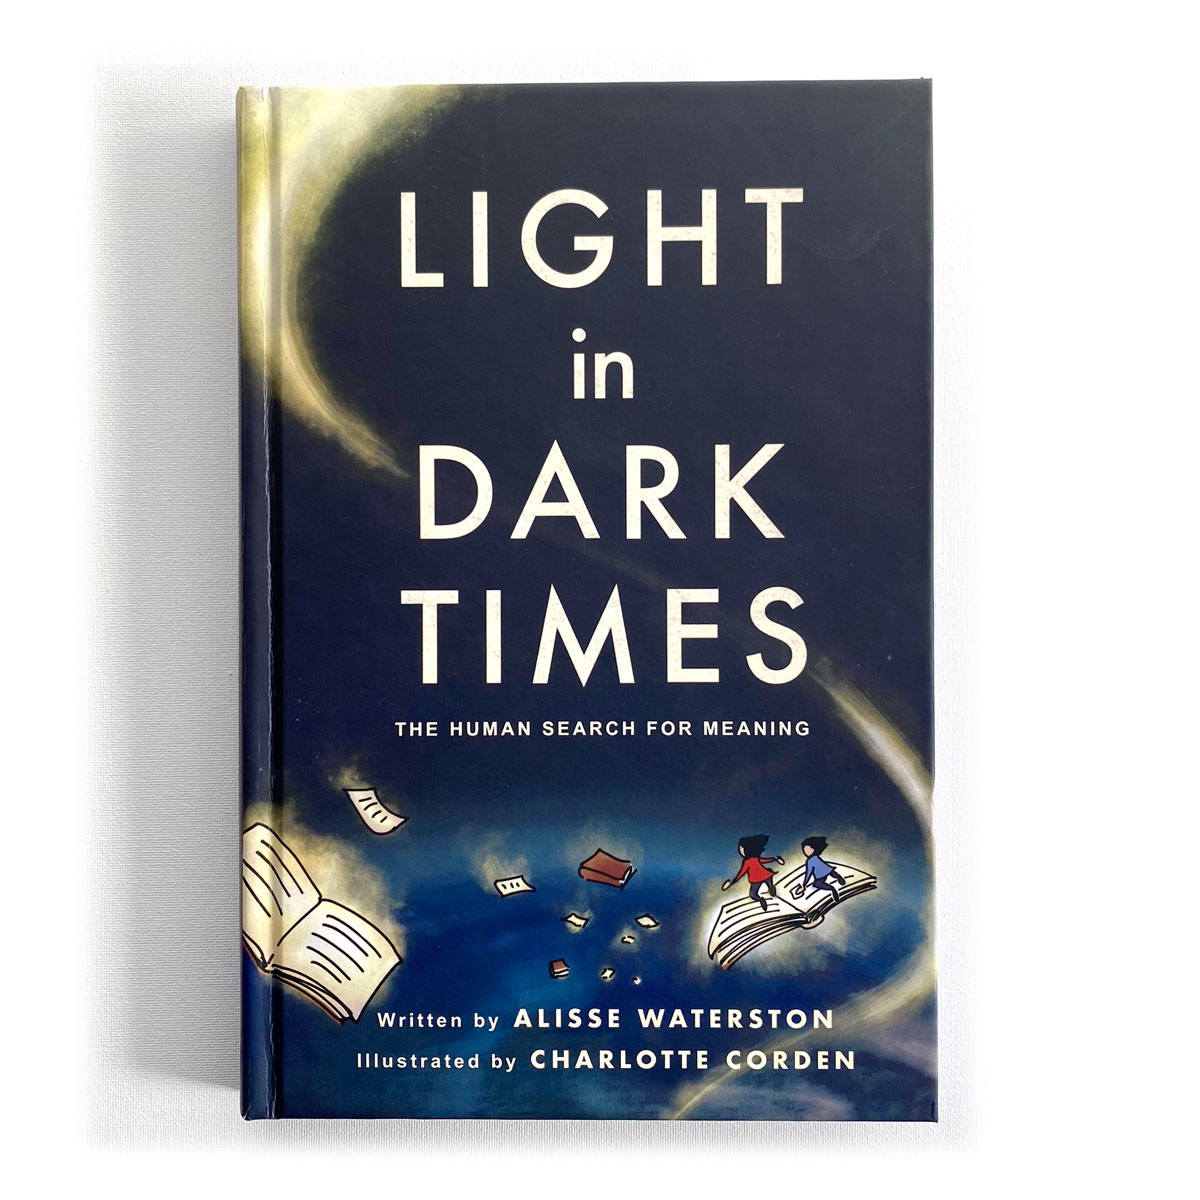 [Making Light in Dark Times: Art and Anthropology for a Troubled World] 